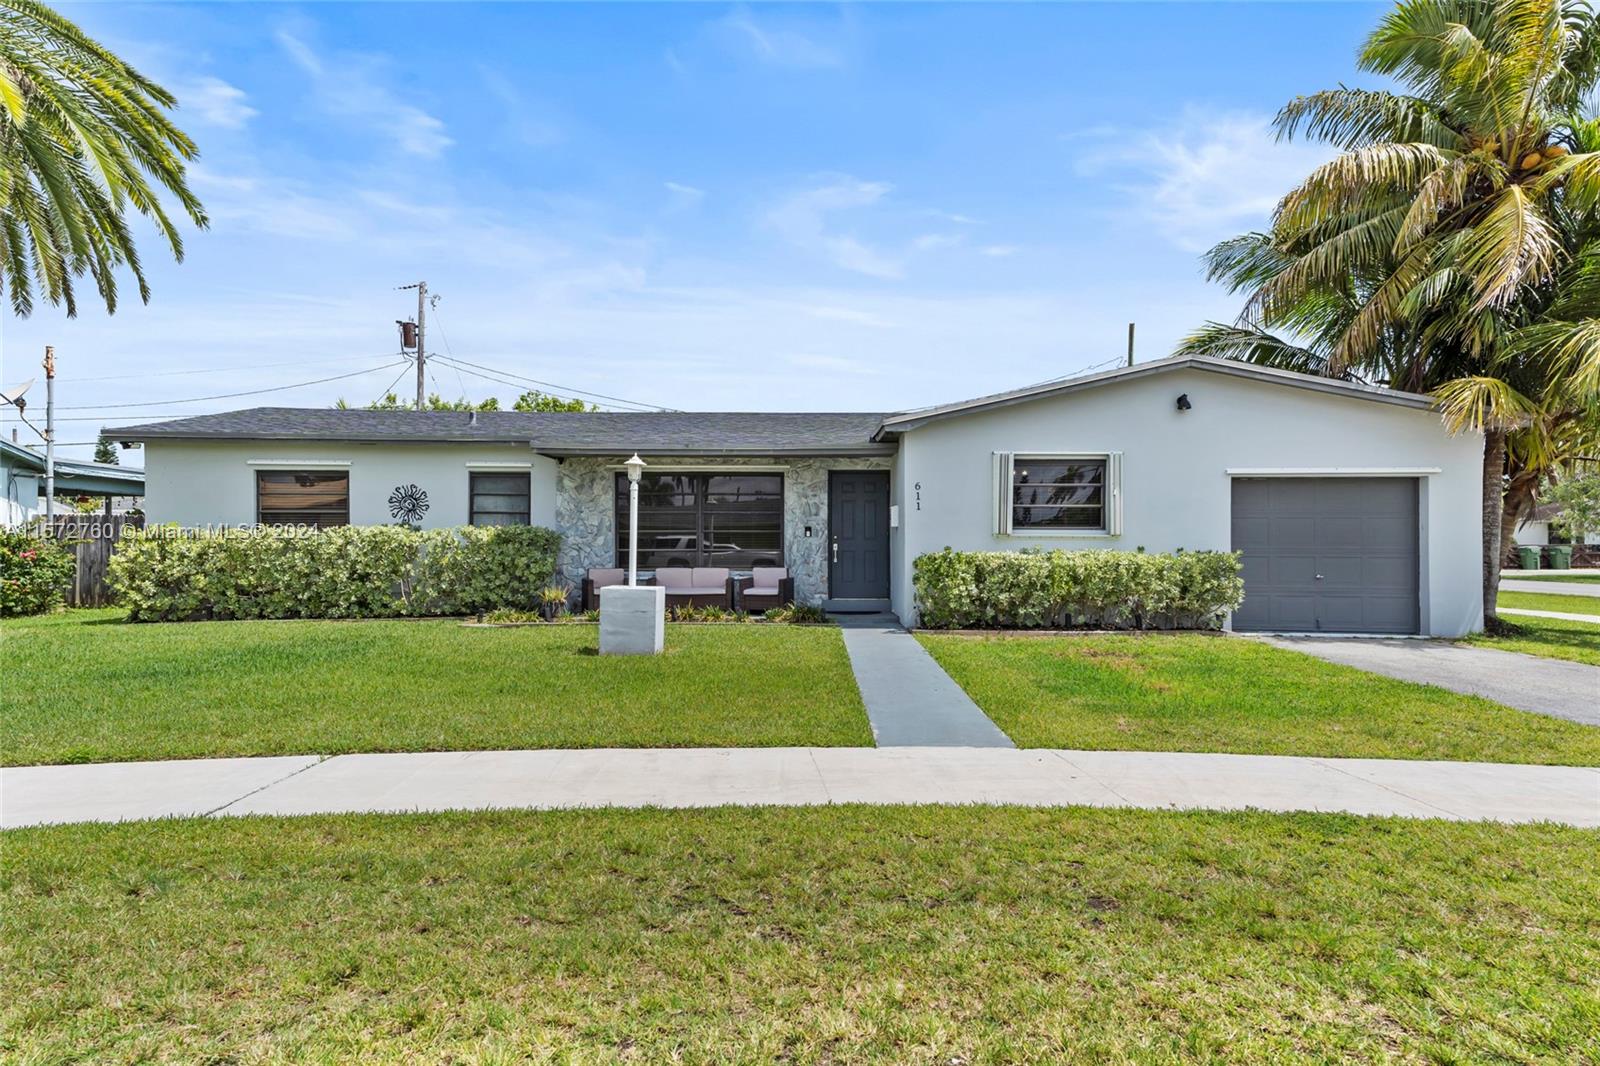 611 Nw 17th St, Homestead, Miami-Dade County, Florida - 4 Bedrooms  
2 Bathrooms - 